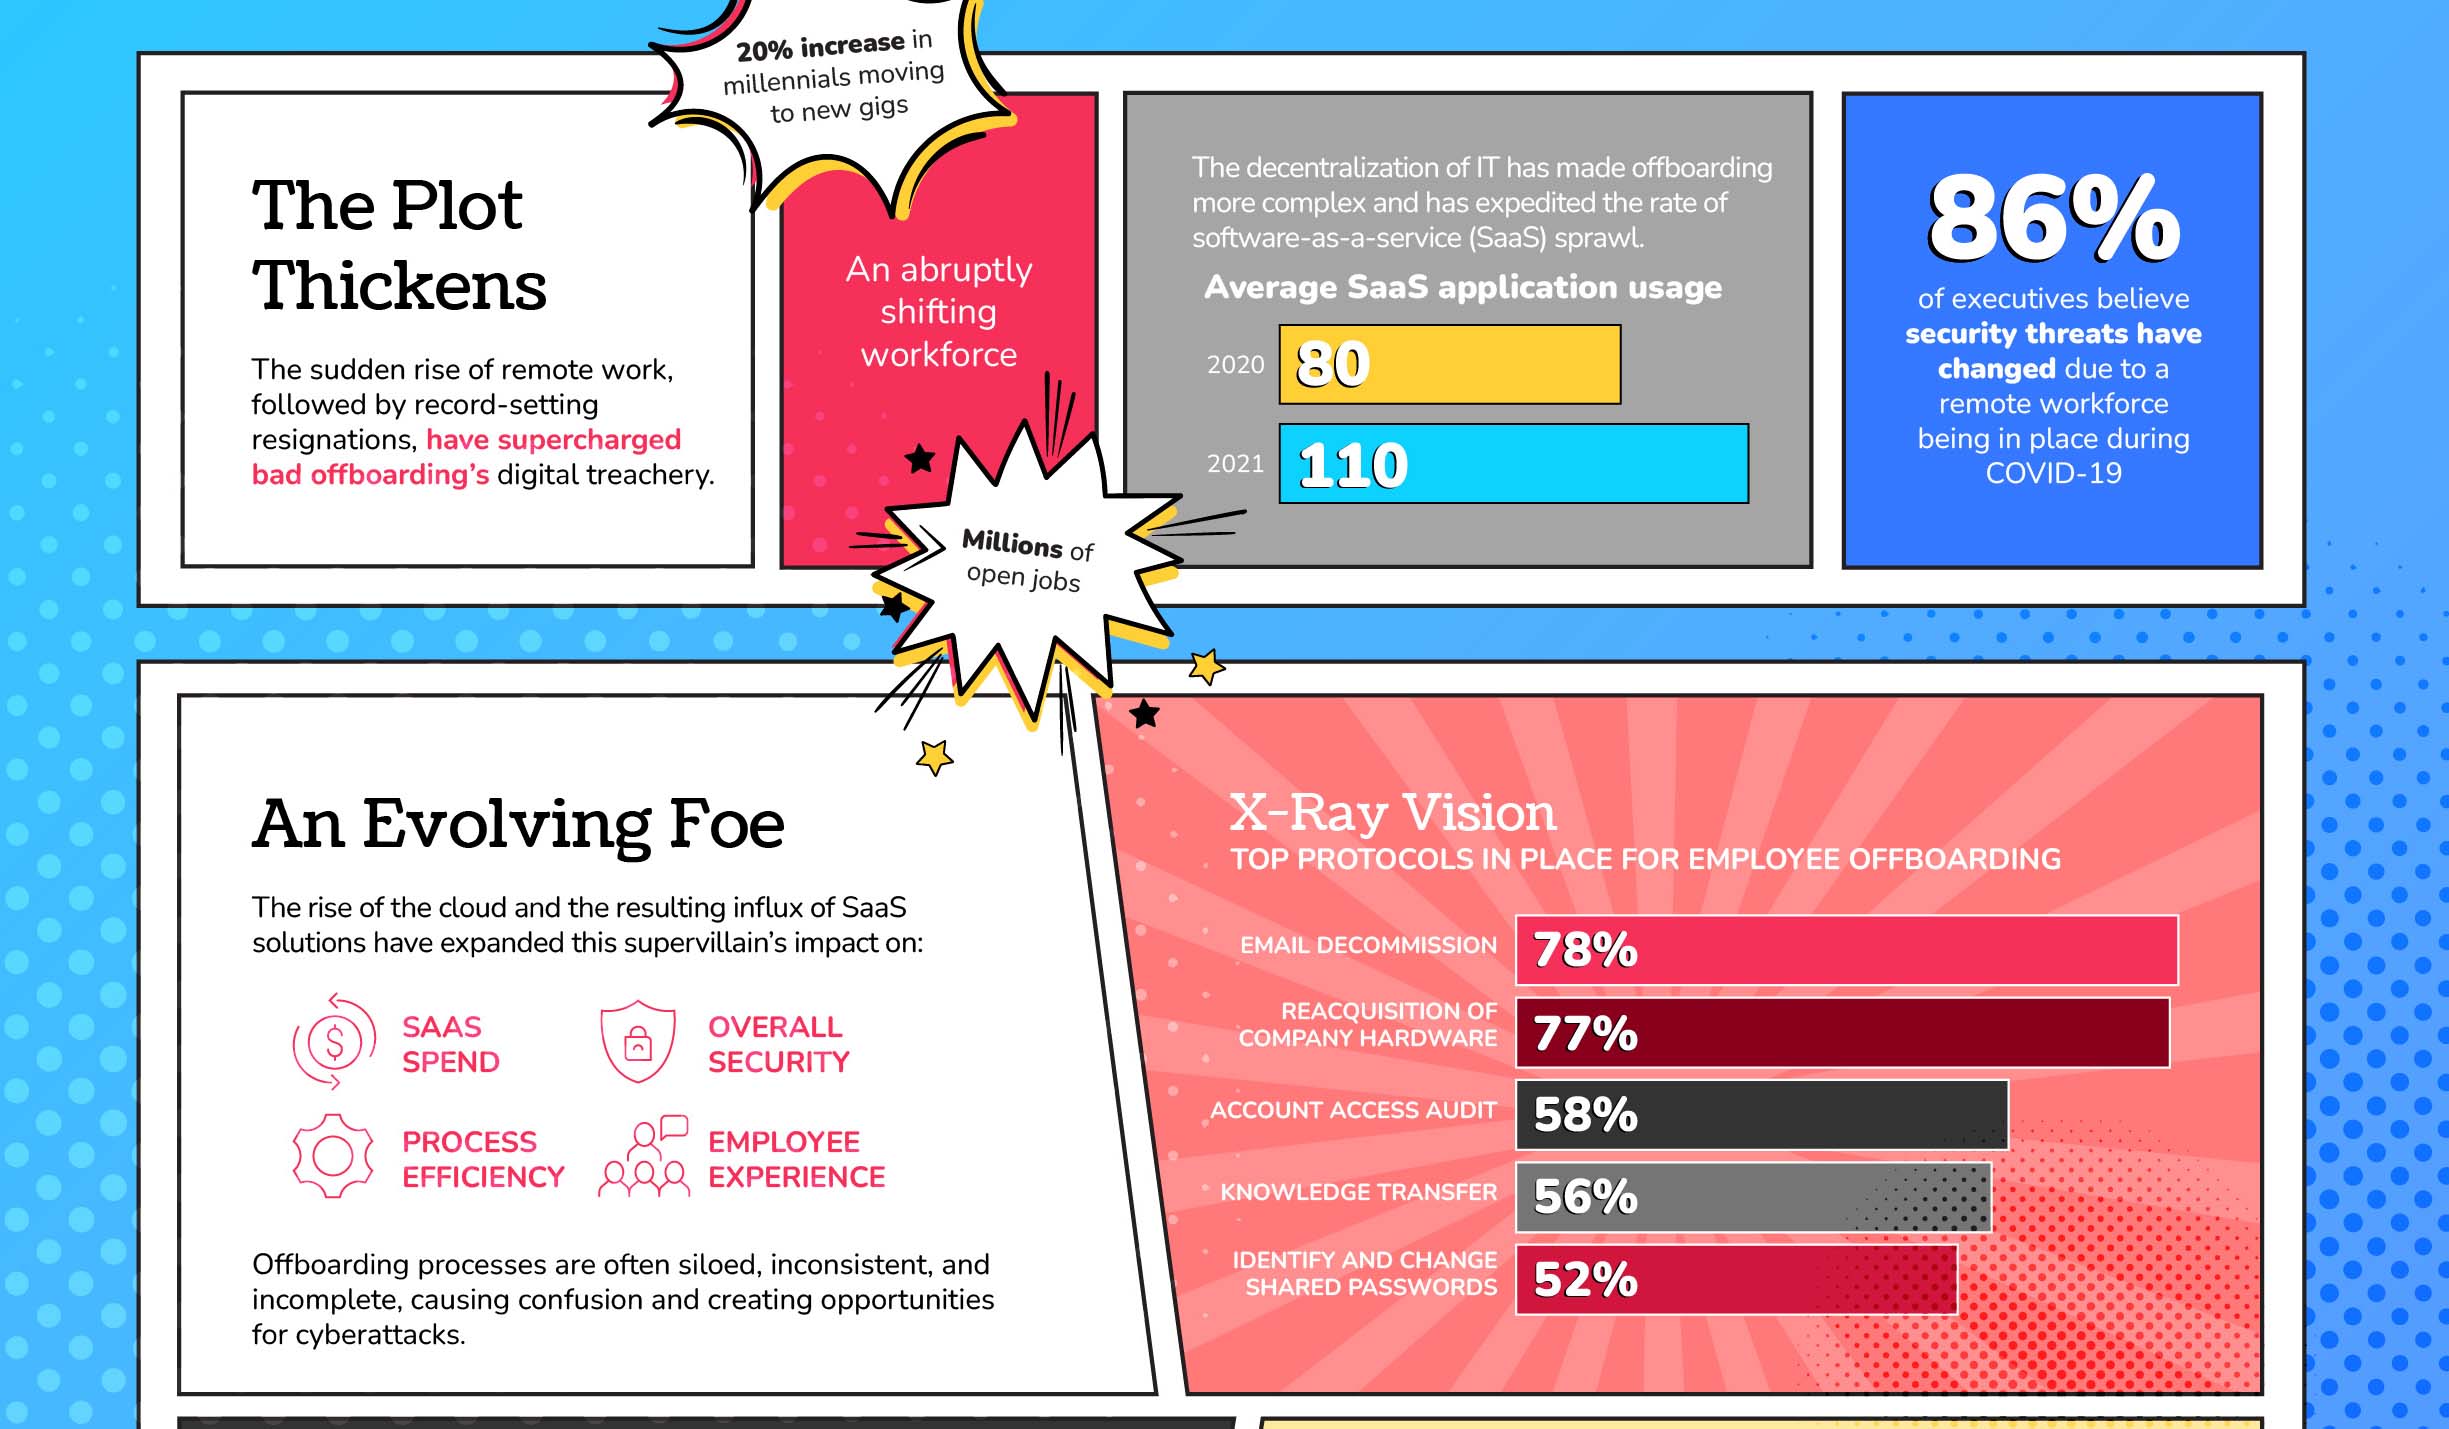 Worried About Security? Rethink Your Offboarding Process [Infographic]